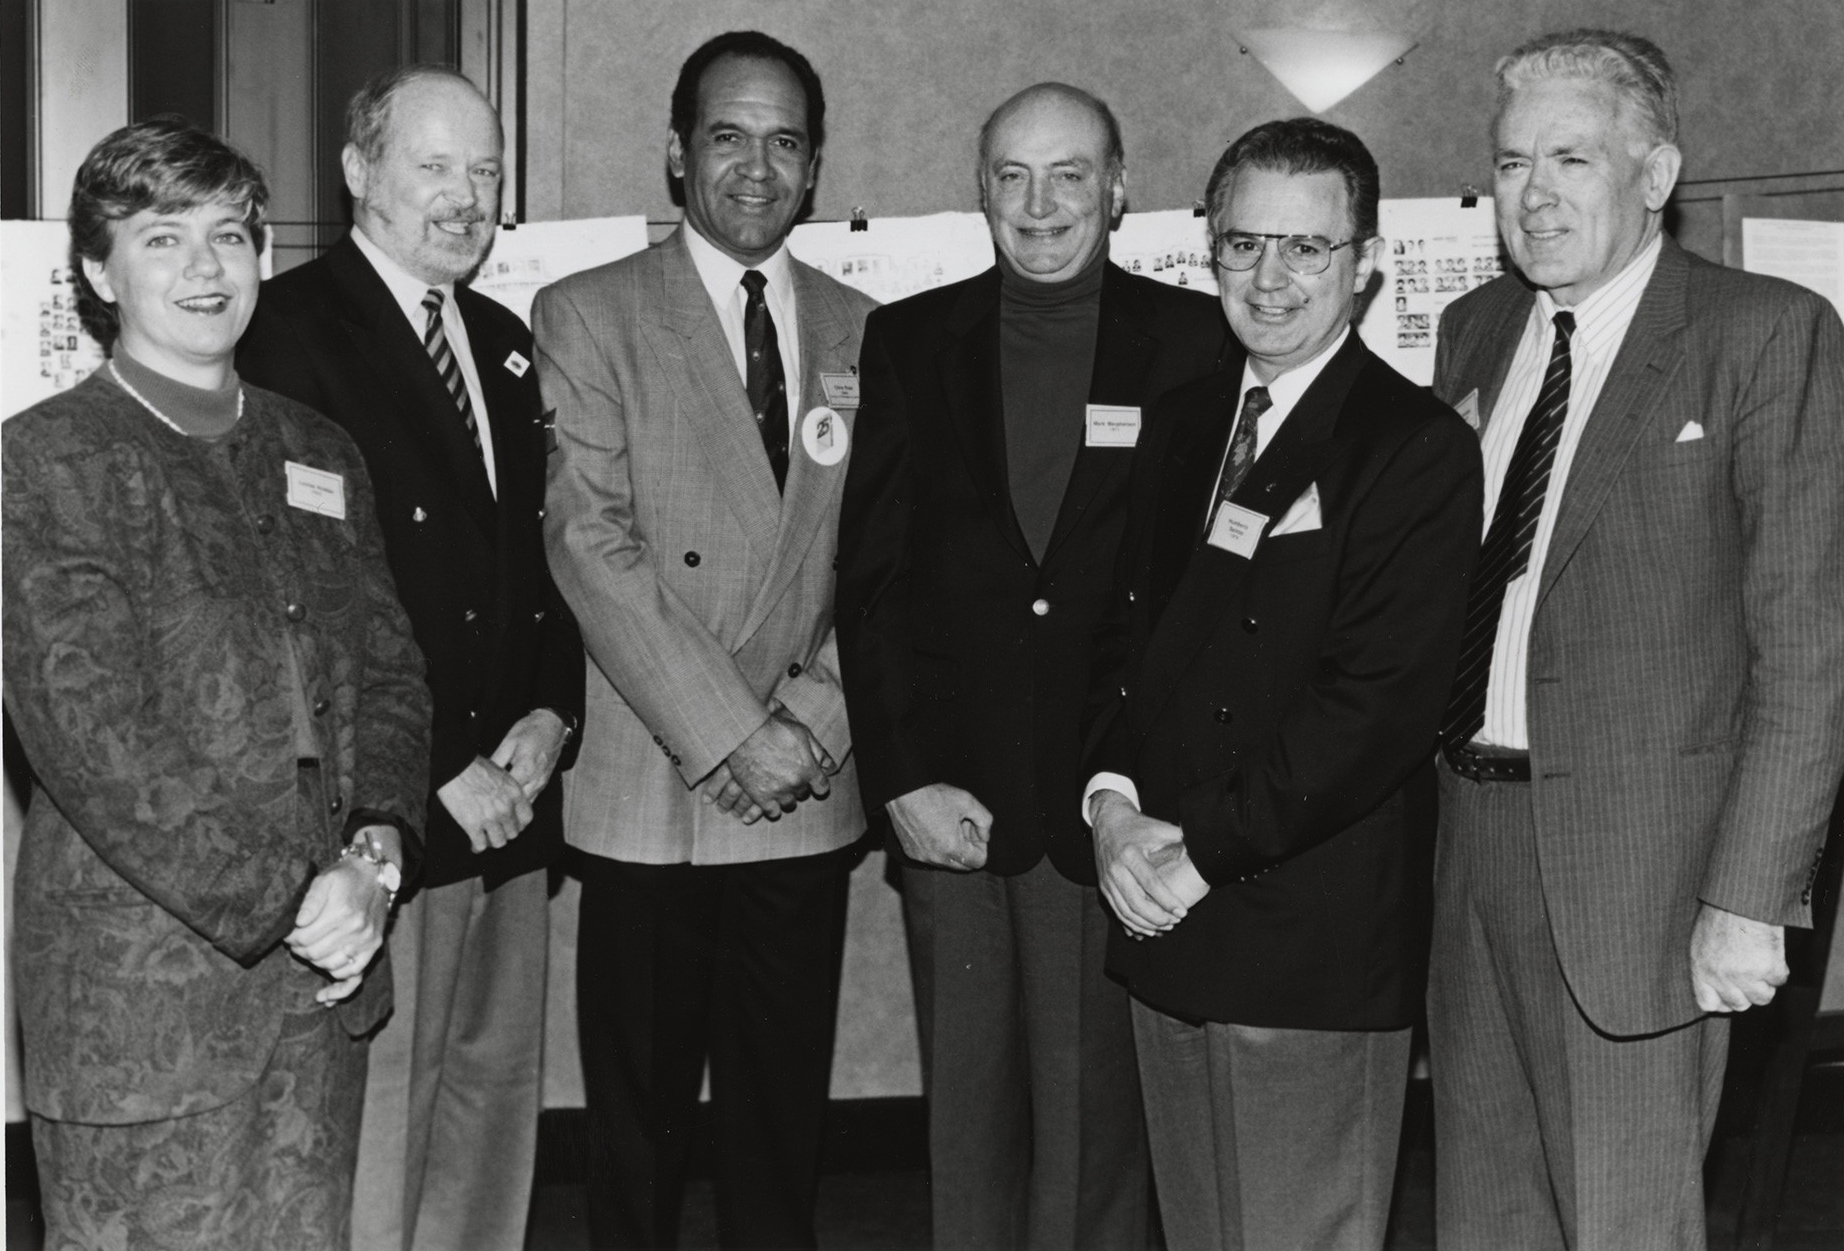 MBA reunion during homecoming, 1993